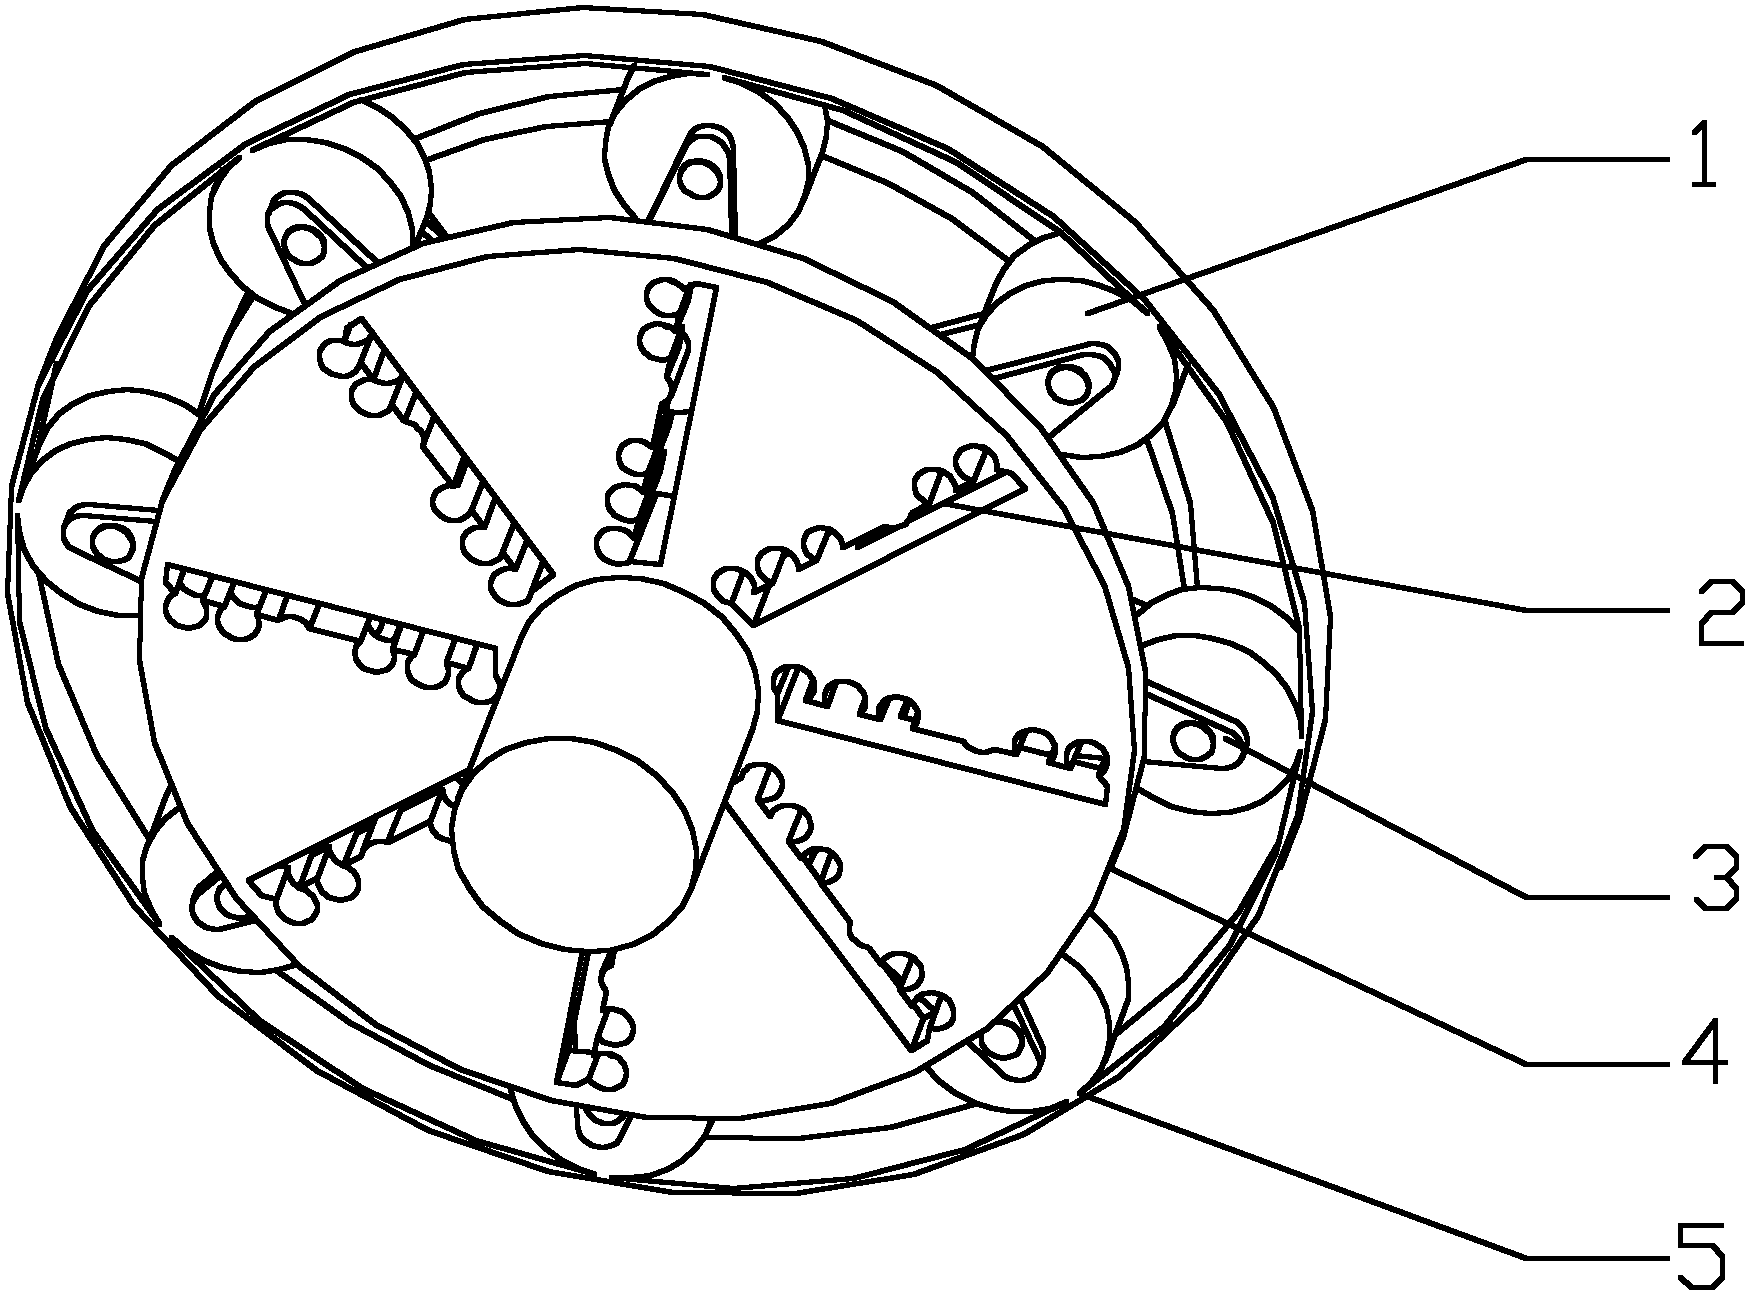 a variable size wheel